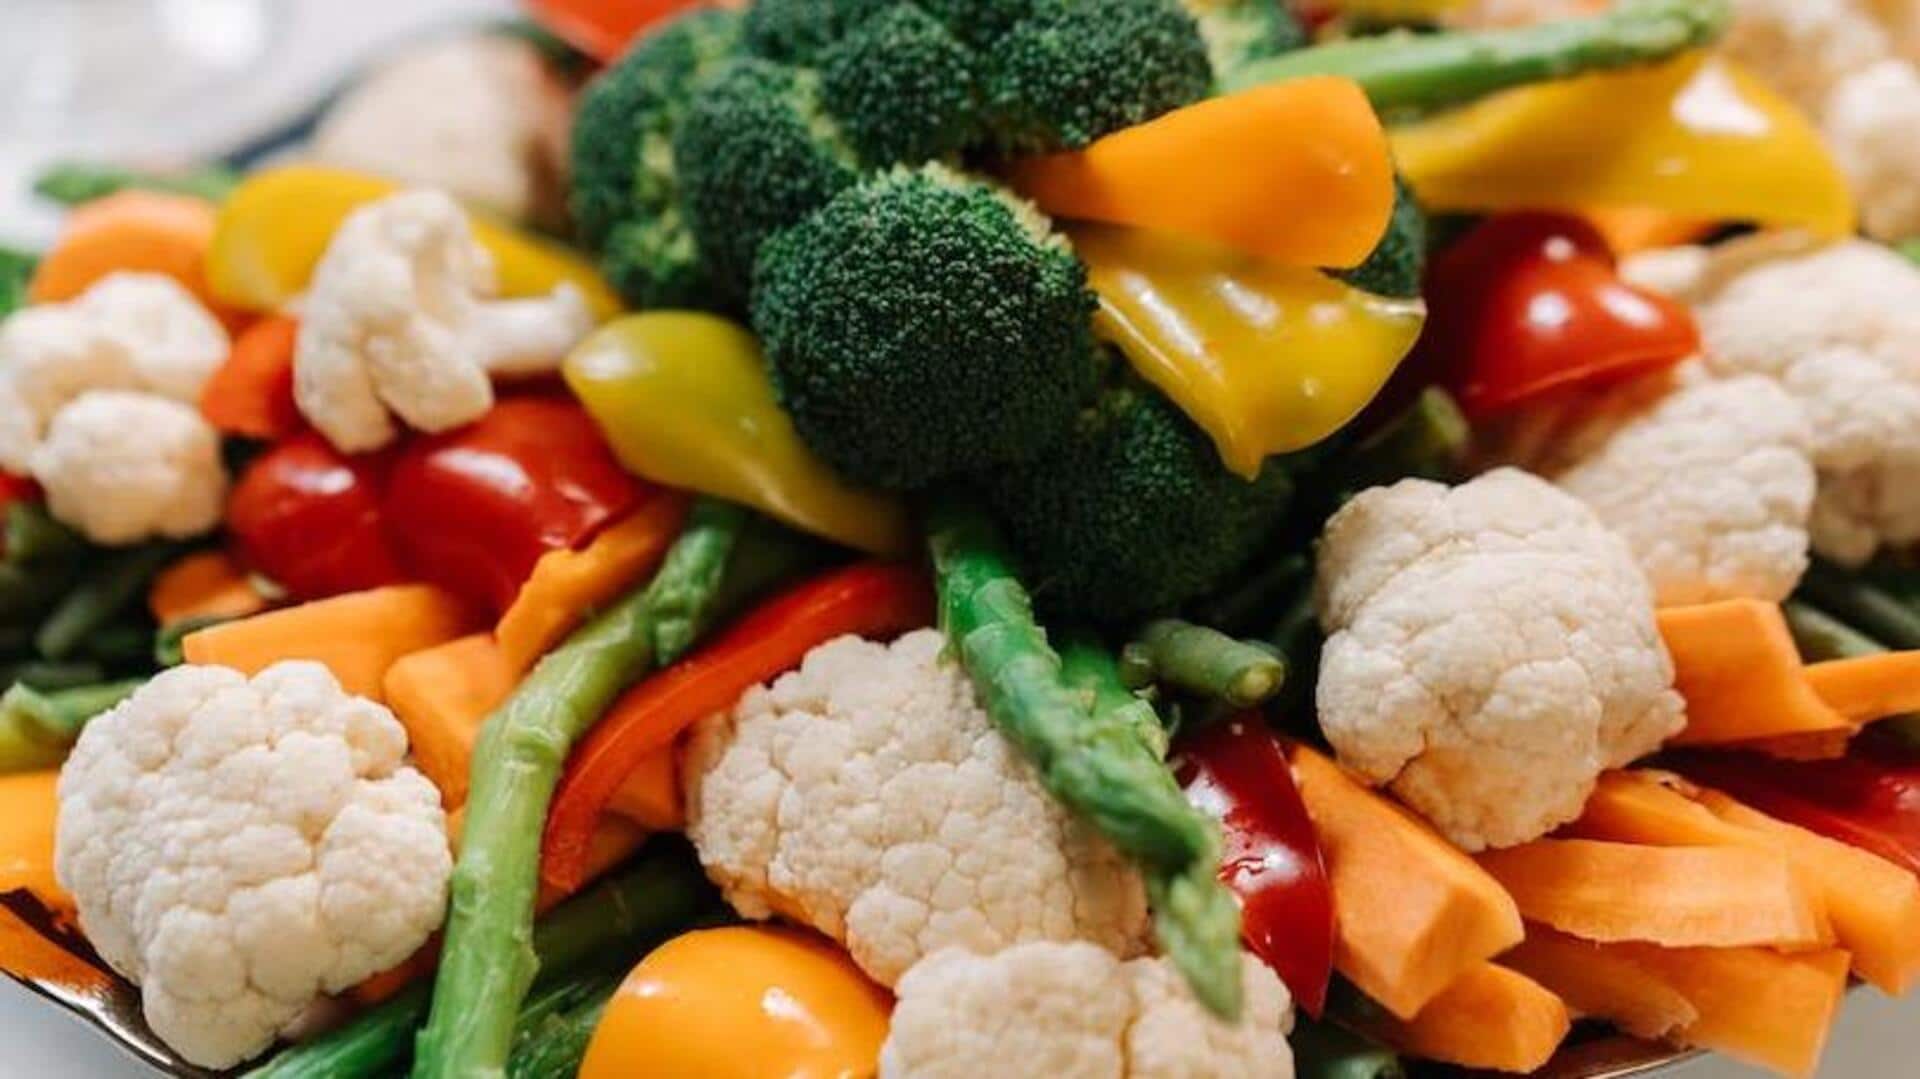 Maintain your health during winter with these must-eat veggies